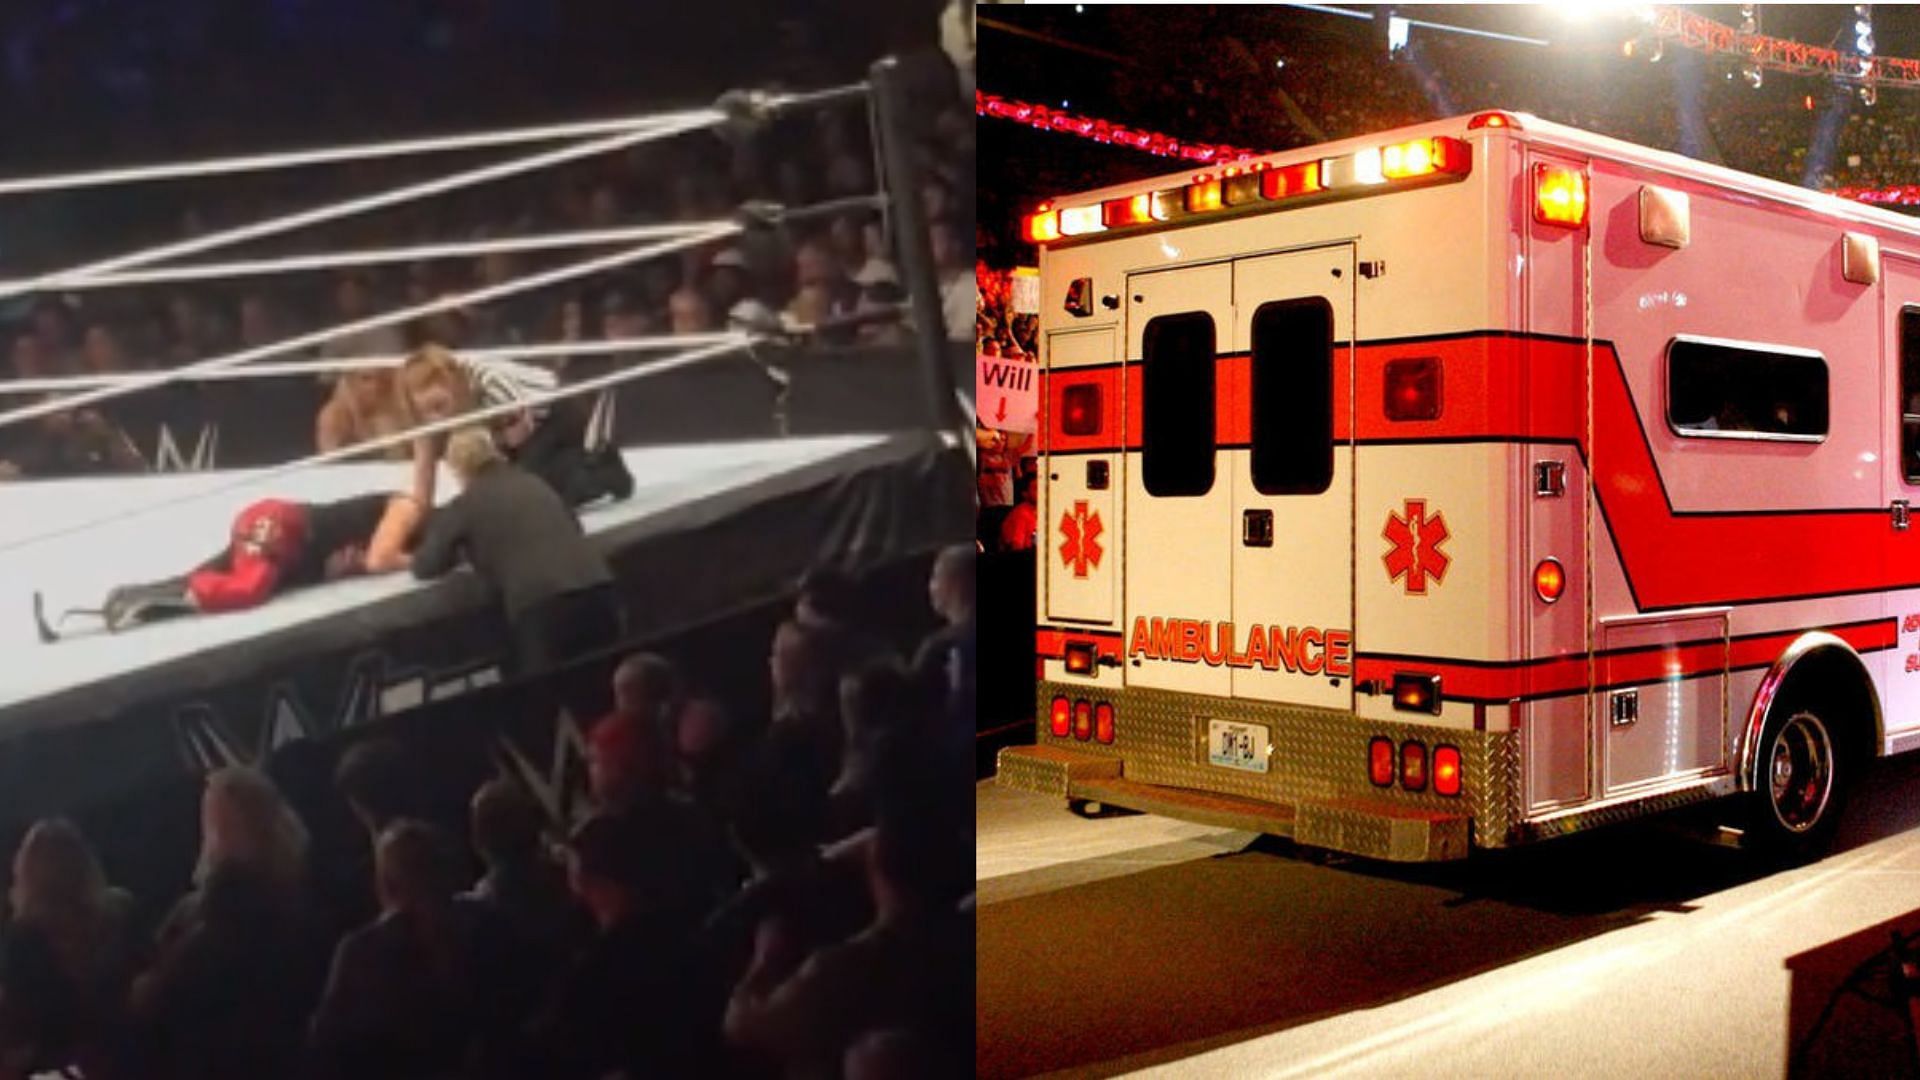 An unfortunate situation at WWE Live in Salisbury.